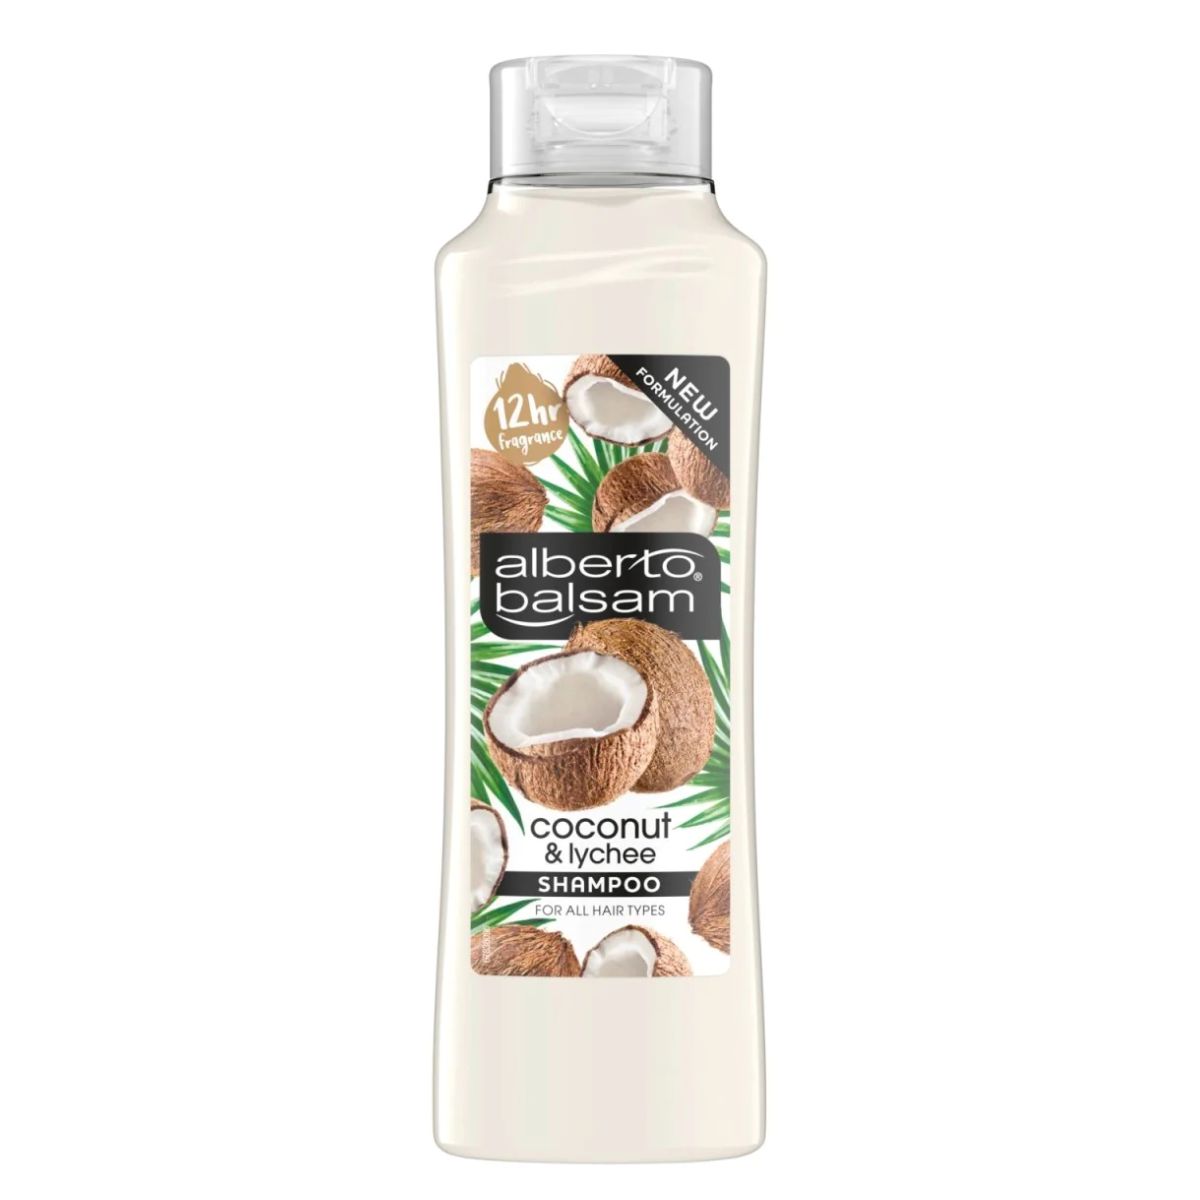 A bottle of Alberto Balsam - Coconut & Lychee Conditioner - 350ml on a white background.